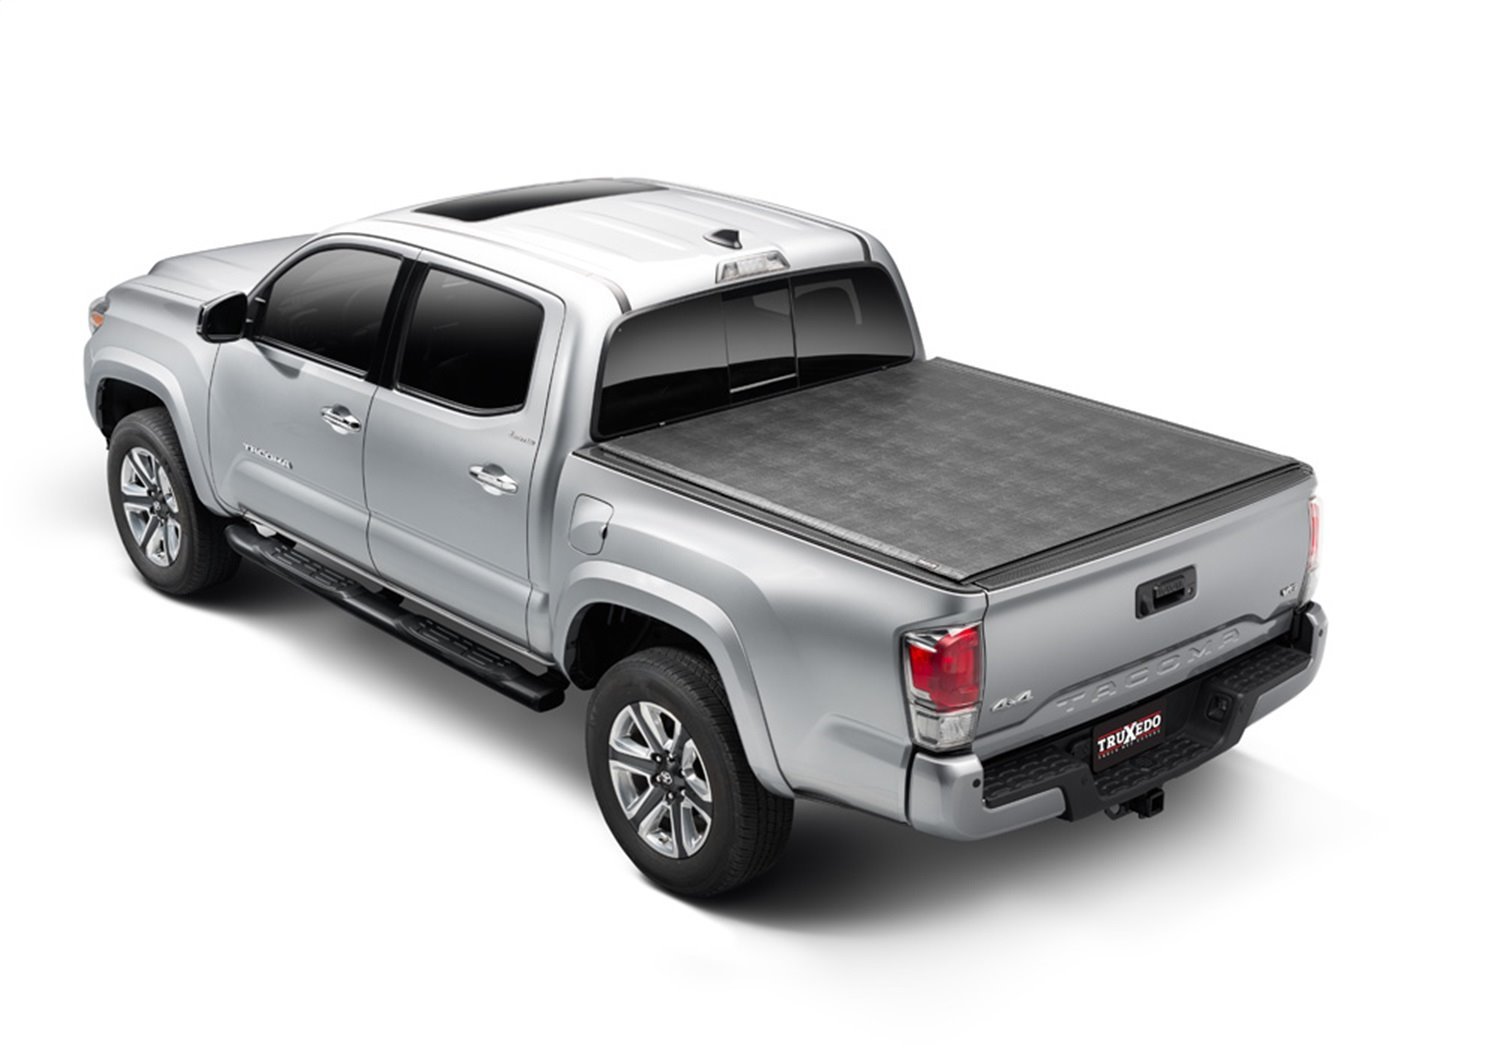 Sentry Roll-Up Tonneau Cover Fits Select Toyota Tundra, With Deck Rail System, Bed Length: 6 ft. 6 in.